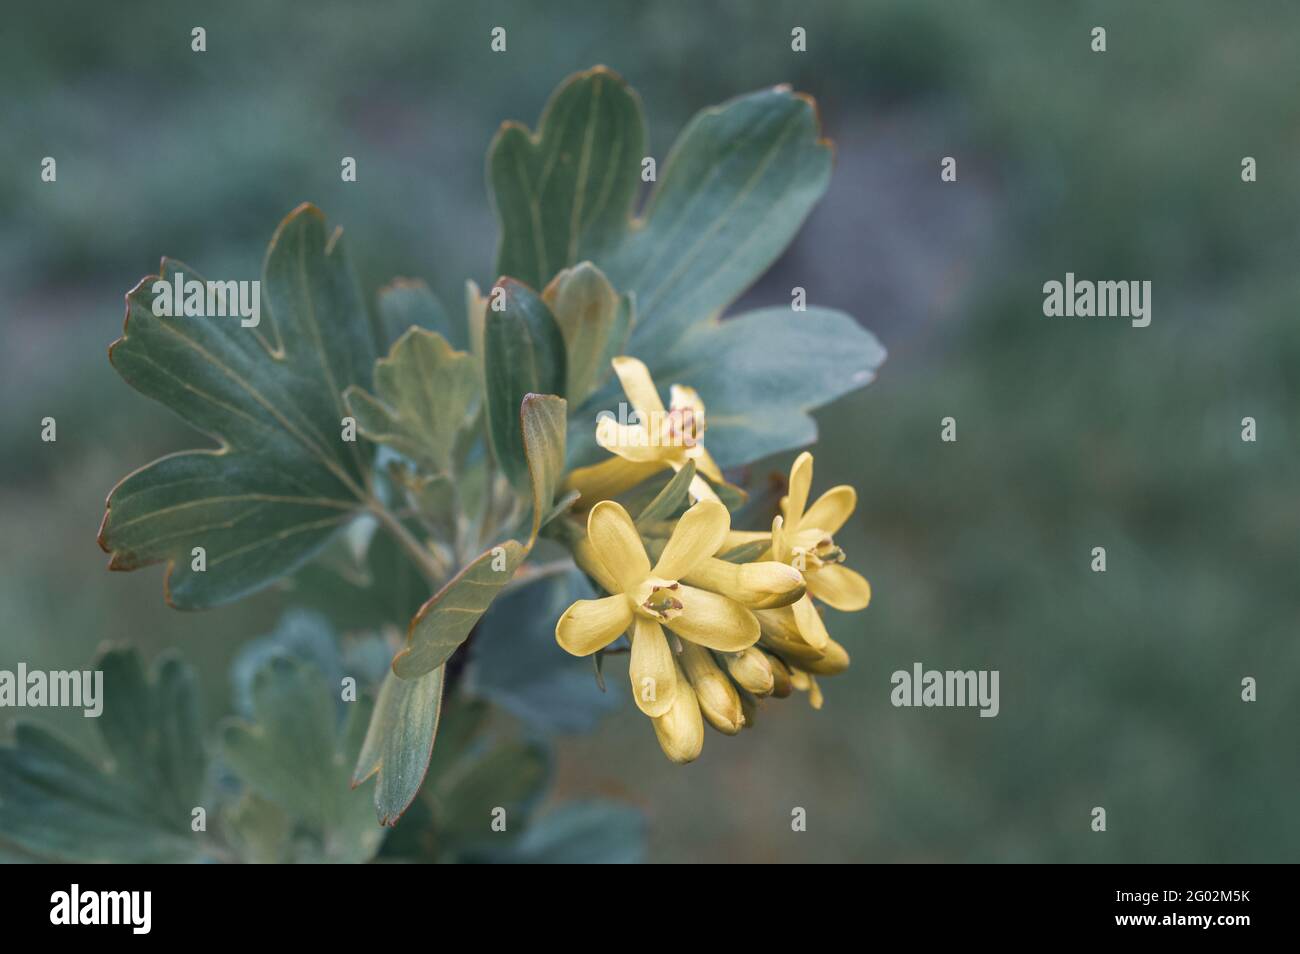 Blooming flowers of European gooseberry in the blurred background Stock Photo